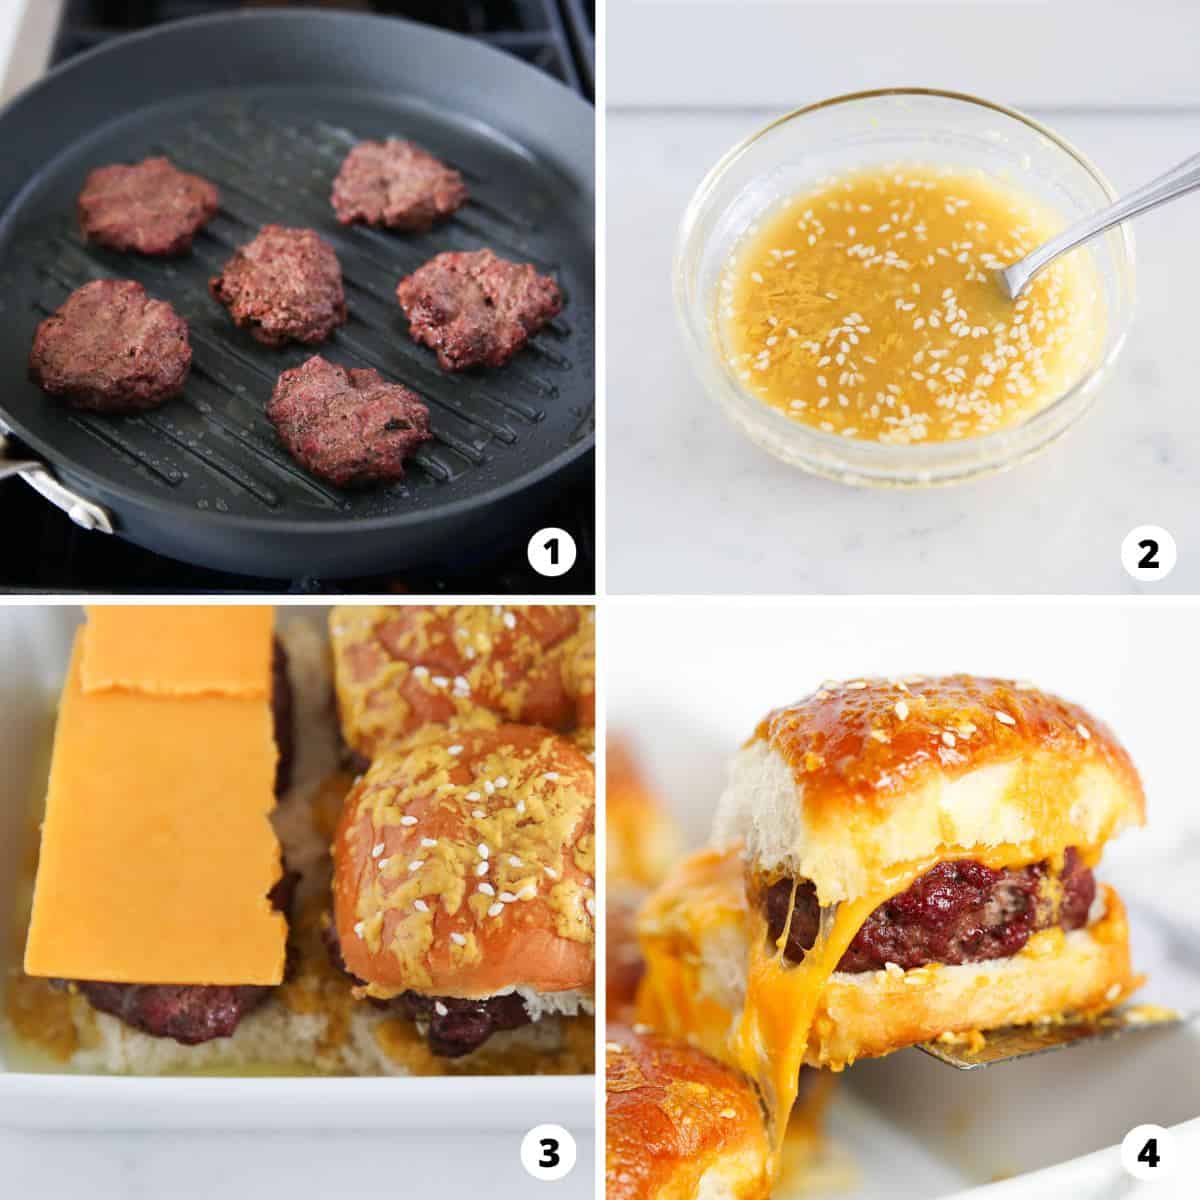 Showing how to make burger sliders in a 4 step collage.